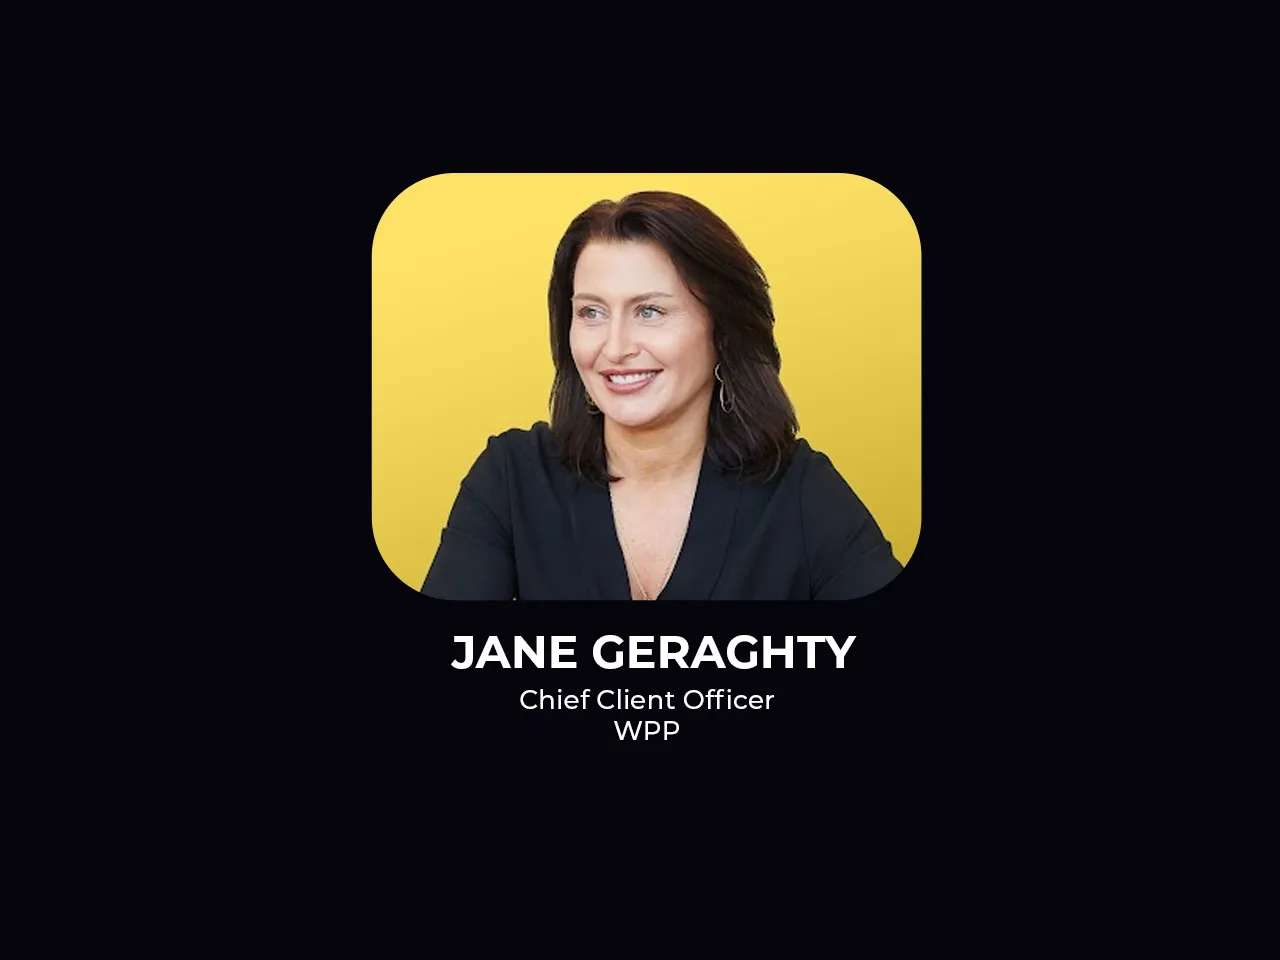 WPP appoints Jane Geraghty as Chief Client Officer